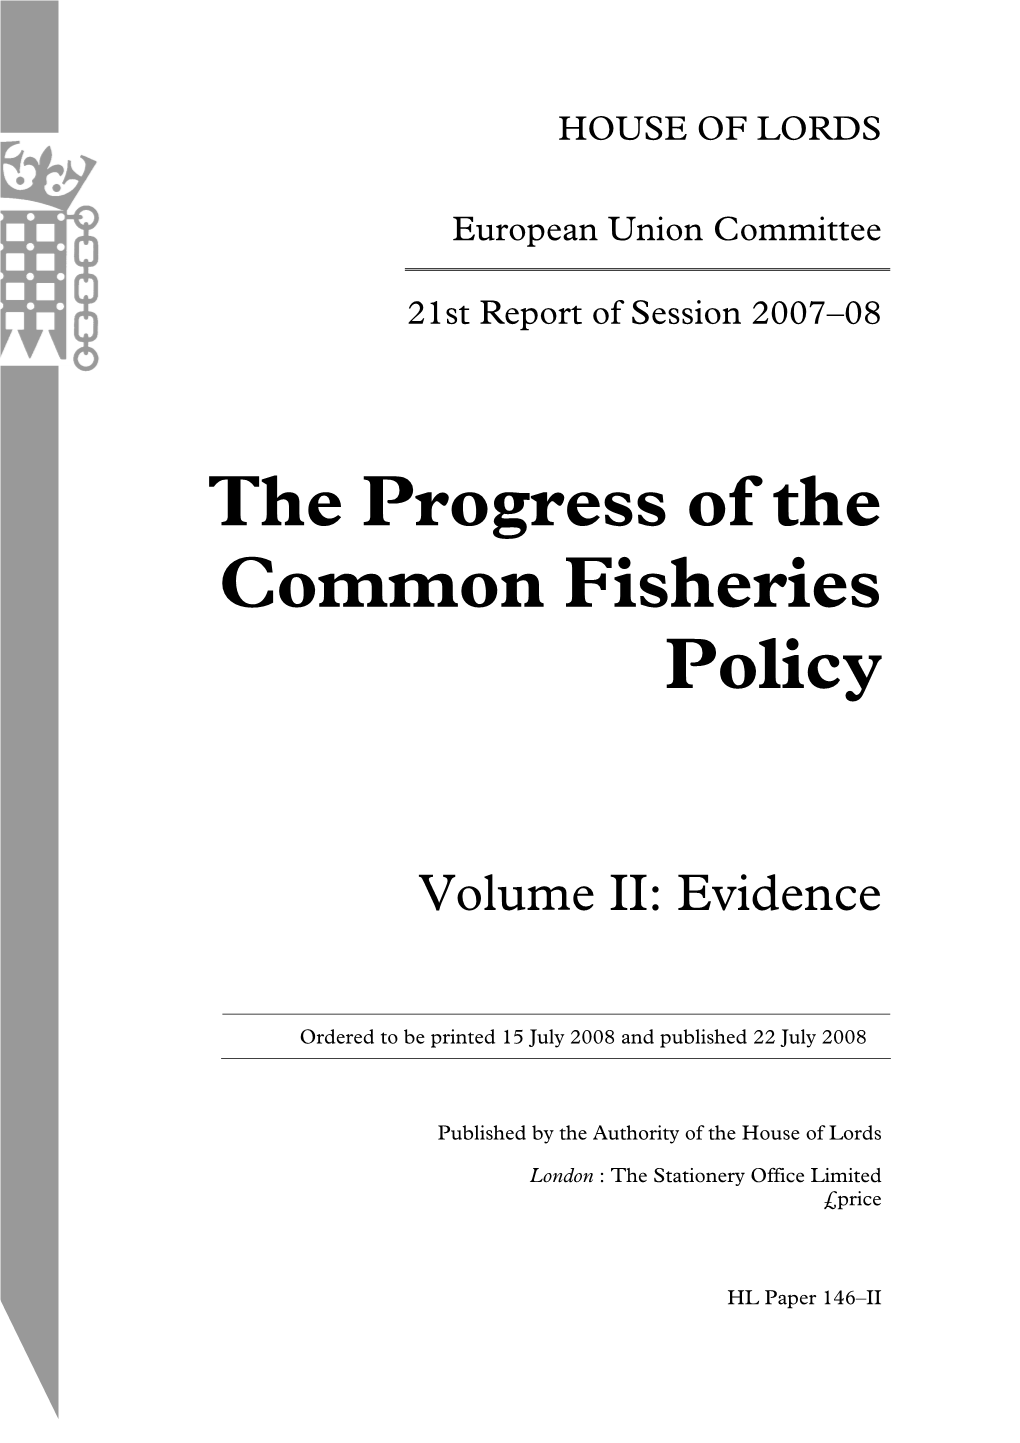 The Progress of the Common Fisheries Policy